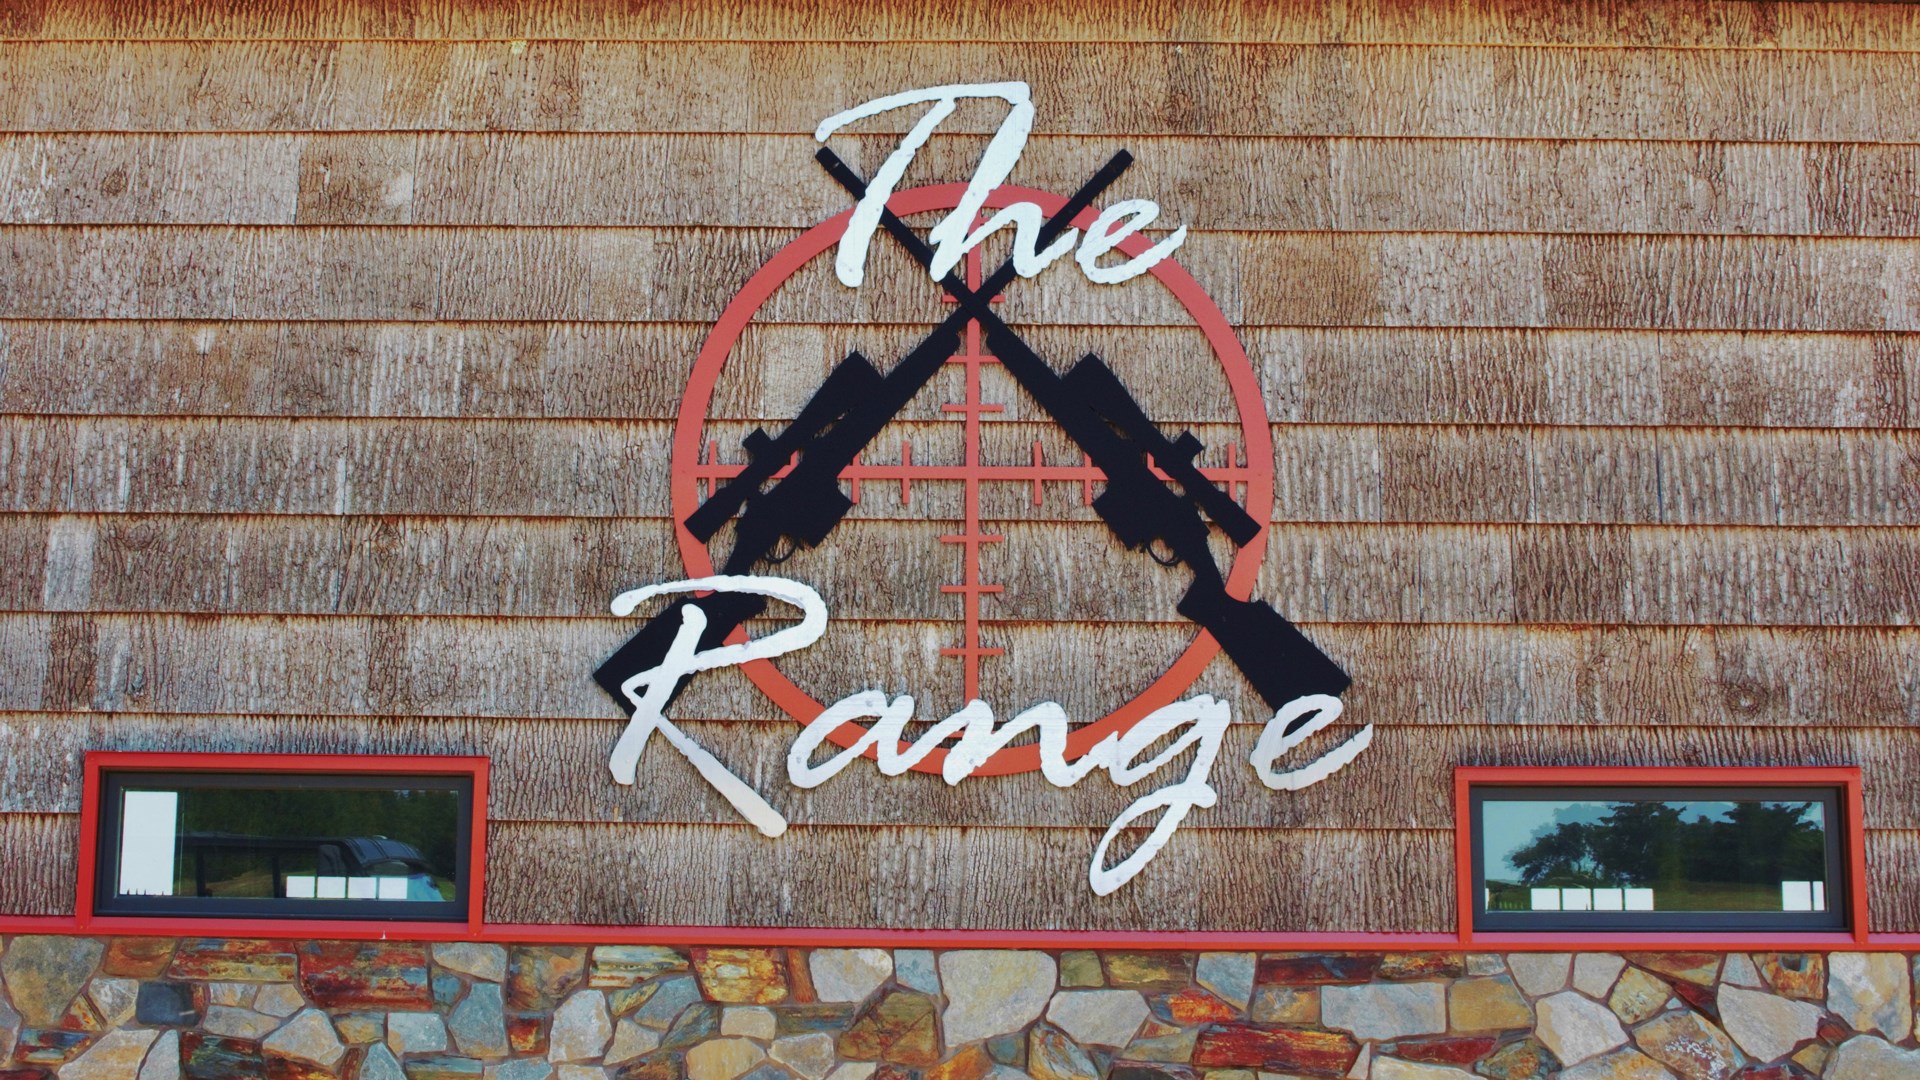 Brick wall stone with logo rifles cross text on wall noting "THE RANGE"